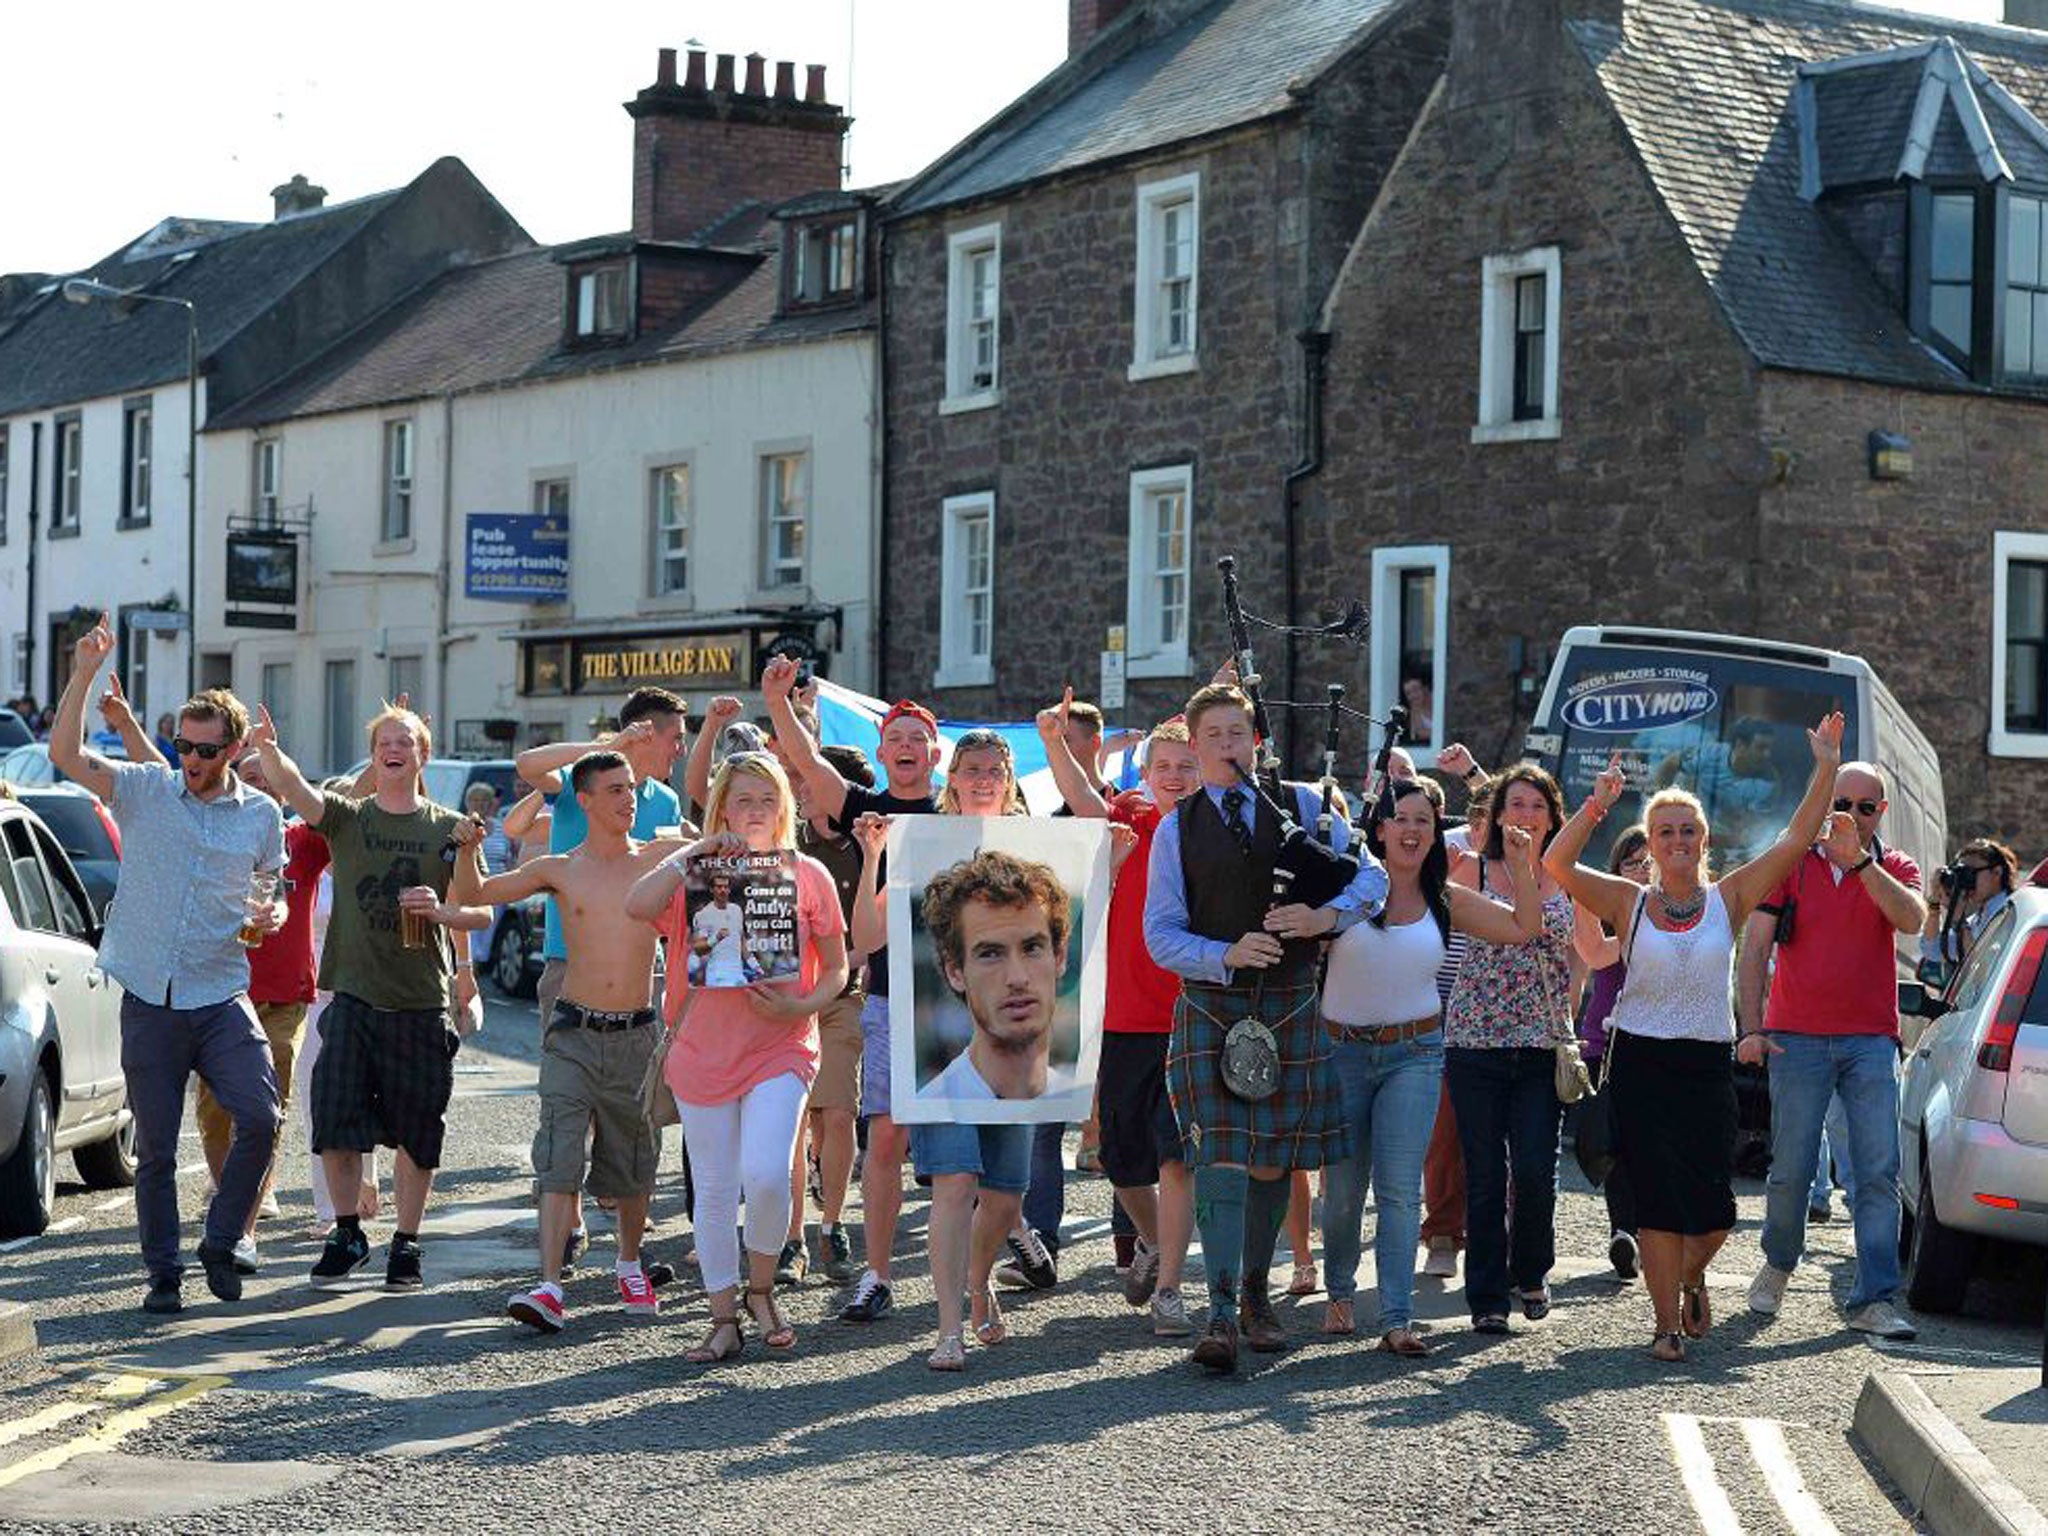 Dunblane residents take to the streets to celebrate after watching local boy Andy Murray of Great Britain beat Novak Djokovic of Serbia in the Wimbledon Men's Singles final